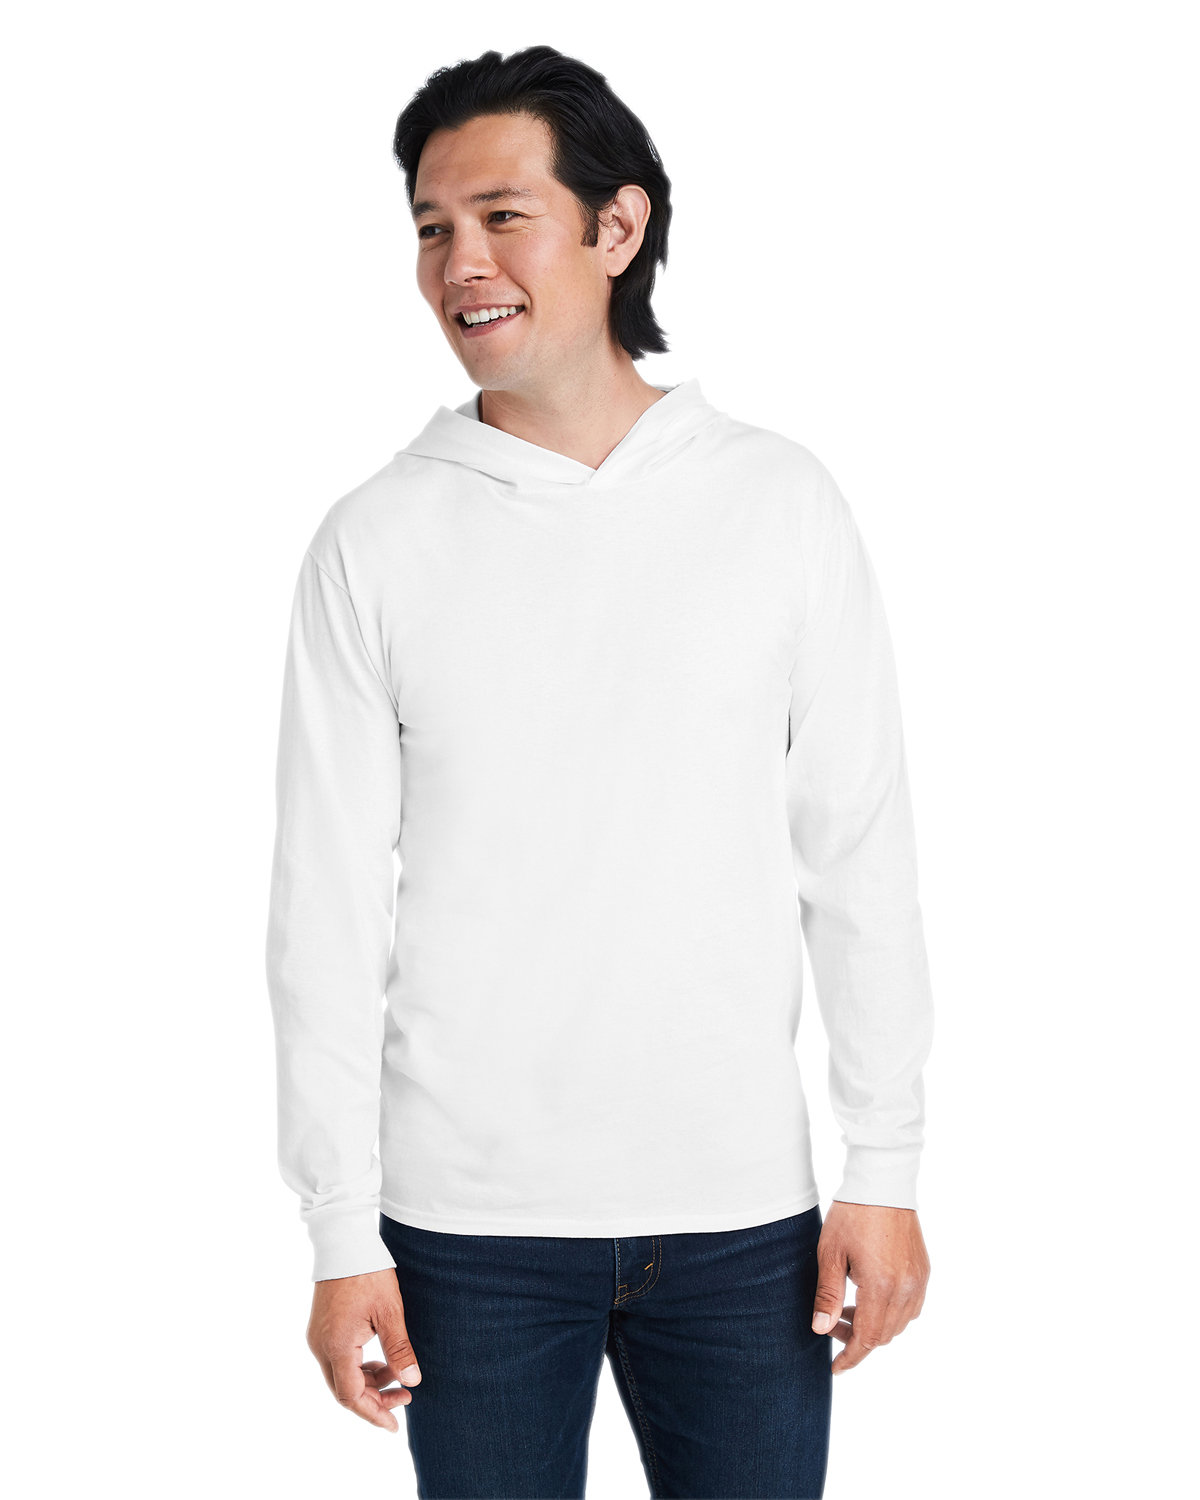 Fruit of the Loom Men's HD Cotton™ Jersey Hooded T-Shirt WHITE 